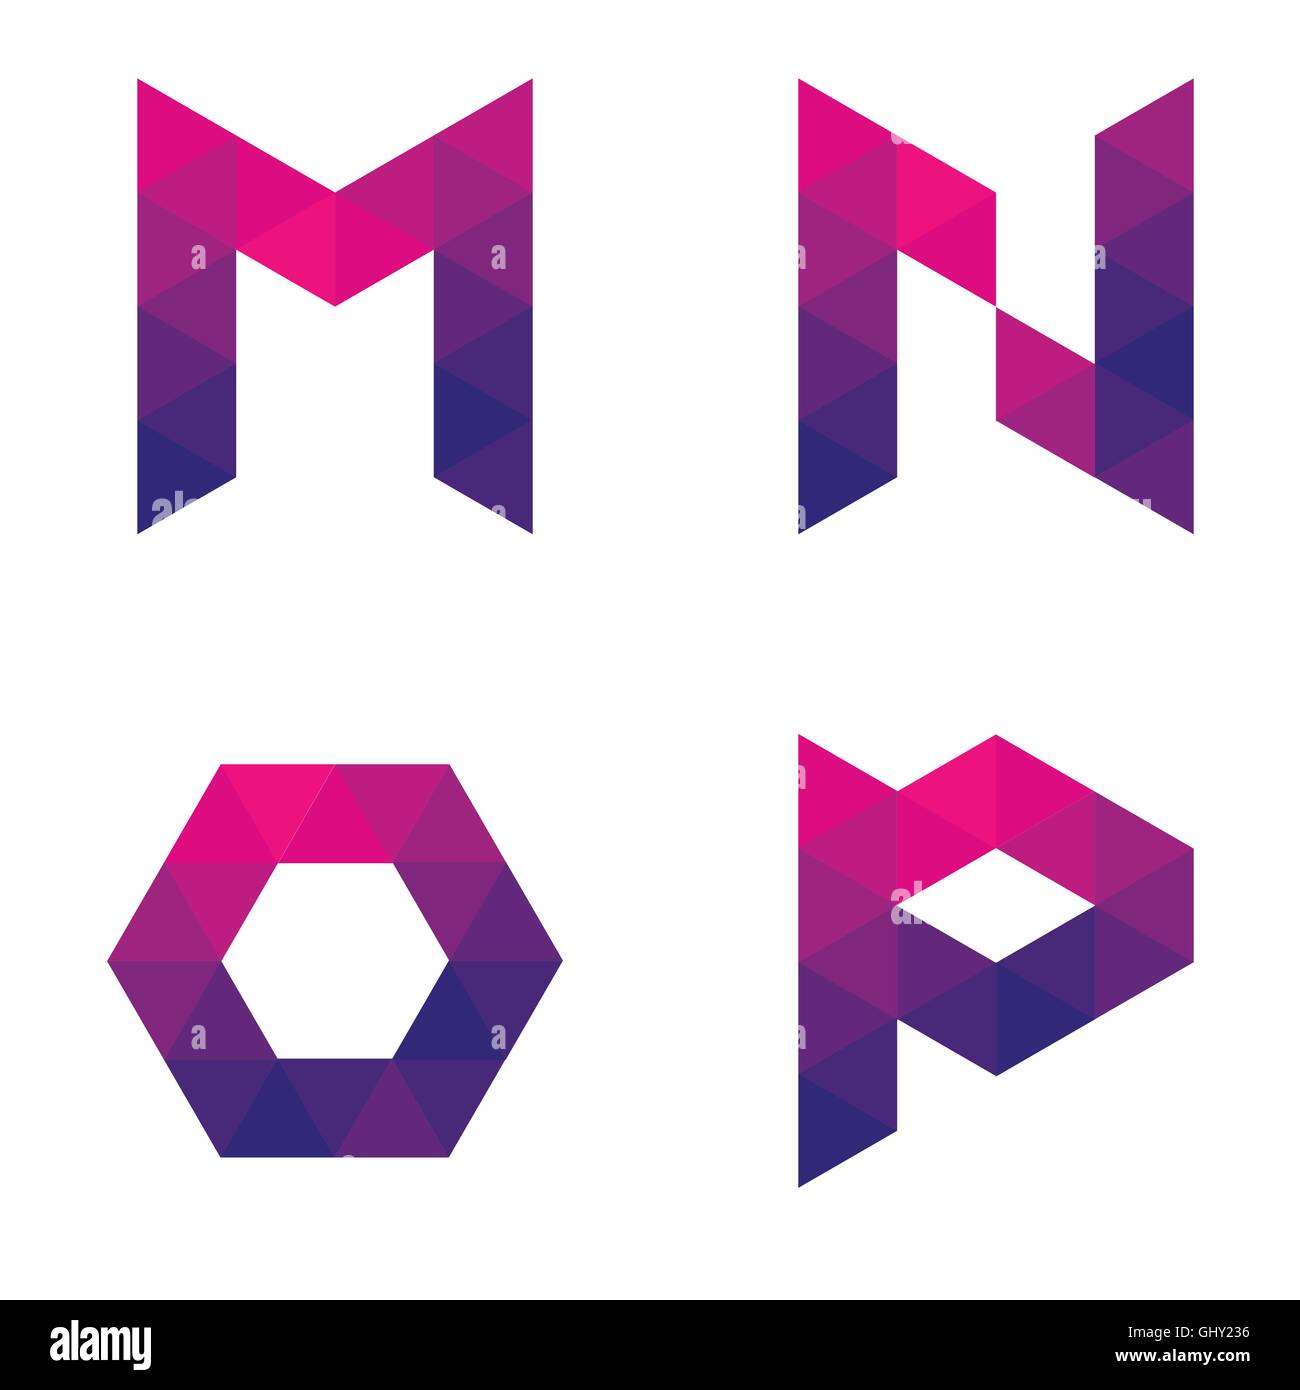 Series of letters m, n, o, p formed by colored triangles. Geometric shape. White background. Isolated. Stock Vector